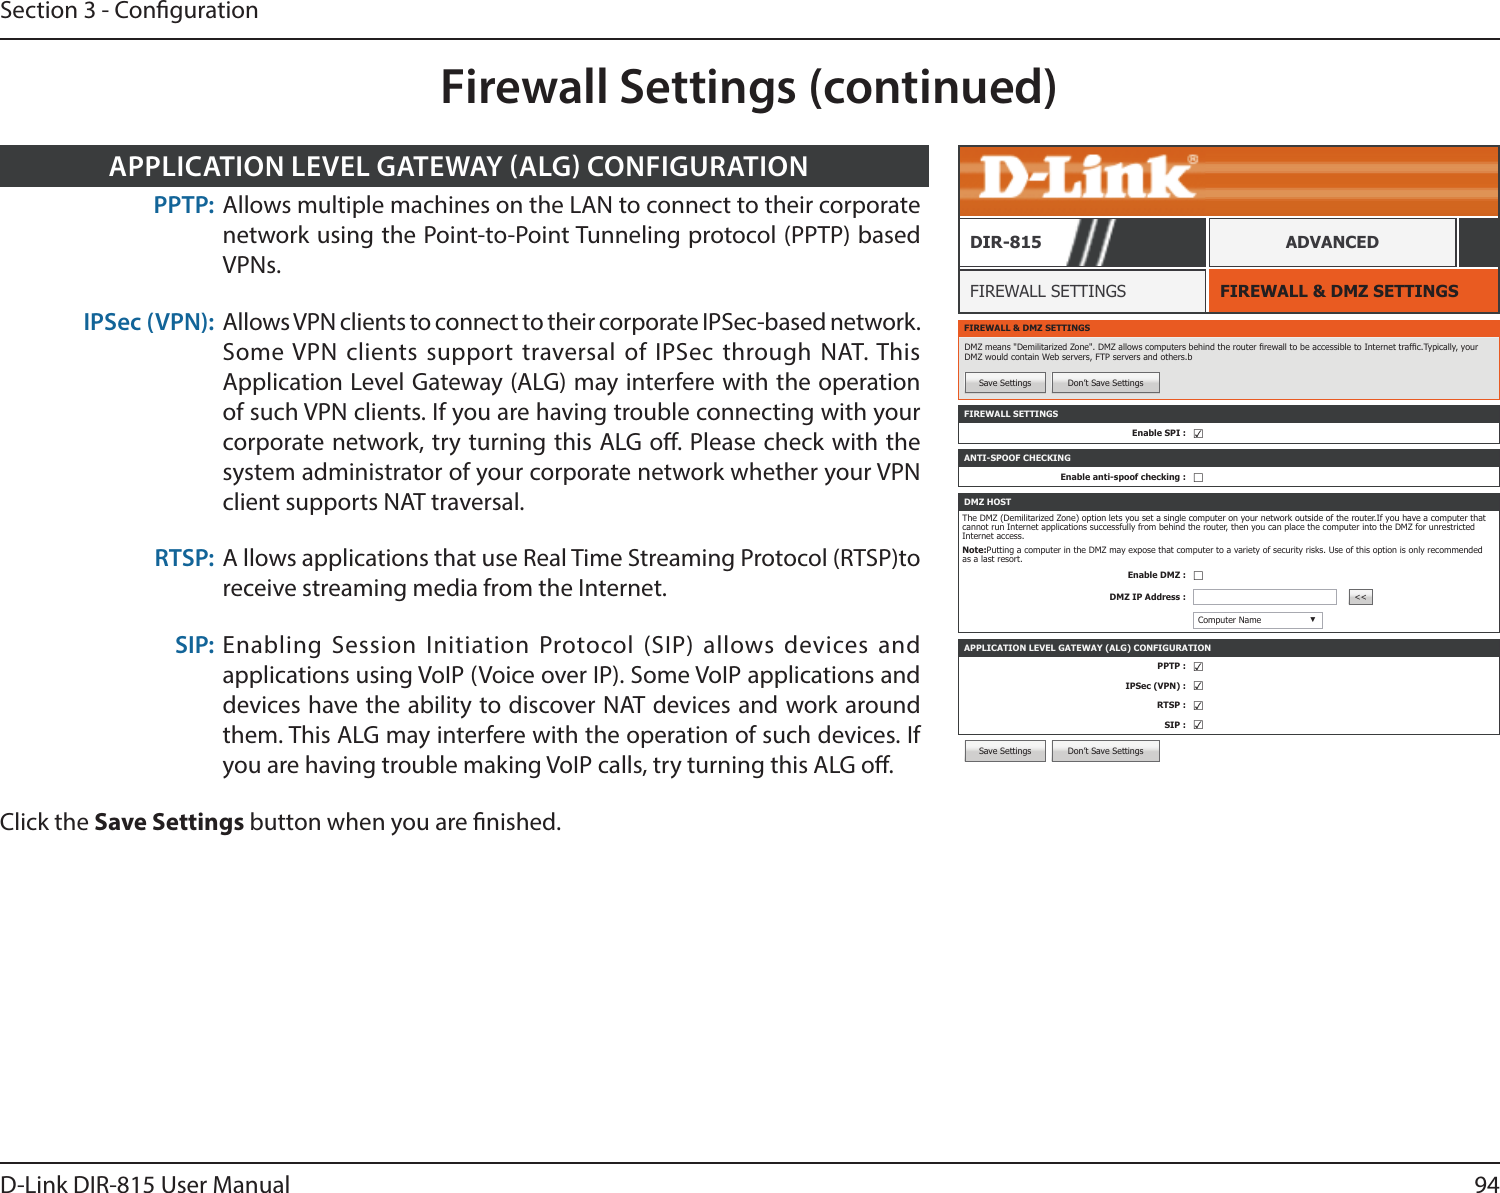 94D-Link DIR-815 User ManualSection 3 - CongurationFirewall Settings (continued)Save Settings Don’t Save SettingsFIREWALL &amp; DMZ SETTINGSFIREWALL SETTINGSDIR-815 ADVANCEDFIREWALL &amp; DMZ SETTINGSDMZ means &quot;Demilitarized Zone&quot;. DMZ allows computers behind the router rewall to be accessible to Internet trafc.Typically, your DMZ would contain Web servers, FTP servers and others.bSave Settings Don’t Save SettingsFIREWALL SETTINGSEnable SPI : ☑APPLICATION LEVEL GATEWAY (ALG) CONFIGURATIONPPTP : ☑IPSec (VPN) : ☑RTSP : ☑SIP : ☑ANTI-SPOOF CHECKINGEnable anti-spoof checking : ☐DMZ HOSTThe DMZ (Demilitarized Zone) option lets you set a single computer on your network outside of the router.If you have a computer that cannot run Internet applications successfully from behind the router, then you can place the computer into the DMZ for unrestricted Internet access.Note:Putting a computer in the DMZ may expose that computer to a variety of security risks. Use of this option is only recommended as a last resort.Enable DMZ : ☐DMZ IP Address : &lt;&lt;Computer Name ▼PPTP: Allows multiple machines on the LAN to connect to their corporate network using the Point-to-Point Tunneling protocol (PPTP) based VPNs.IPSec (VPN): Allows VPN clients to connect to their corporate IPSec-based network. Some VPN clients support traversal of IPSec through NAT. This Application Level Gateway (ALG) may interfere with the operation of such VPN clients. If you are having trouble connecting with your corporate network, try turning this ALG o. Please check with the system administrator of your corporate network whether your VPN client supports NAT traversal.RTSP: A llows applications that use Real Time Streaming Protocol (RTSP)to receive streaming media from the Internet.SIP: Enabling Session Initiation Protocol (SIP) allows devices and applications using VoIP (Voice over IP). Some VoIP applications and devices have the ability to discover NAT devices and work around them. This ALG may interfere with the operation of such devices. If you are having trouble making VoIP calls, try turning this ALG o.Click the Save Settings button when you are nished.APPLICATION LEVEL GATEWAY ALG CONFIGURATION